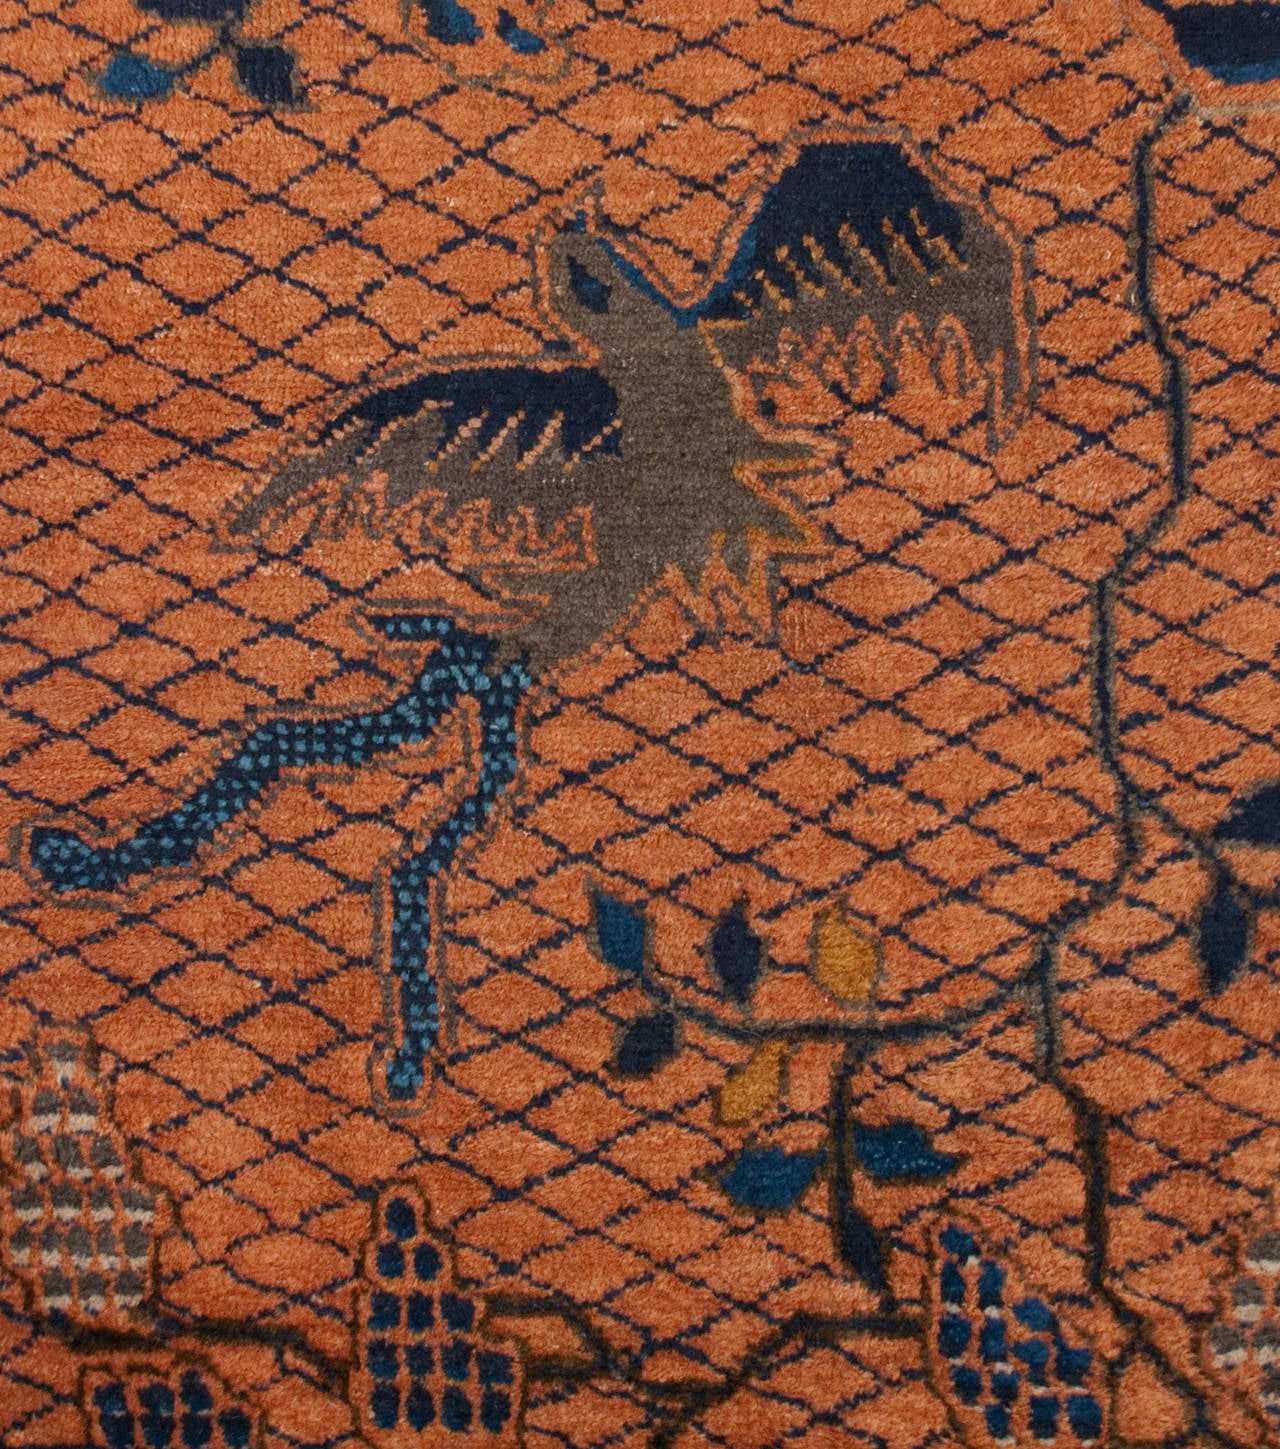 An unusual early 20th century Chinese Peking rug with a beautiful floral and bird design with an indigo border, veiled by an all-over lattice pattern.